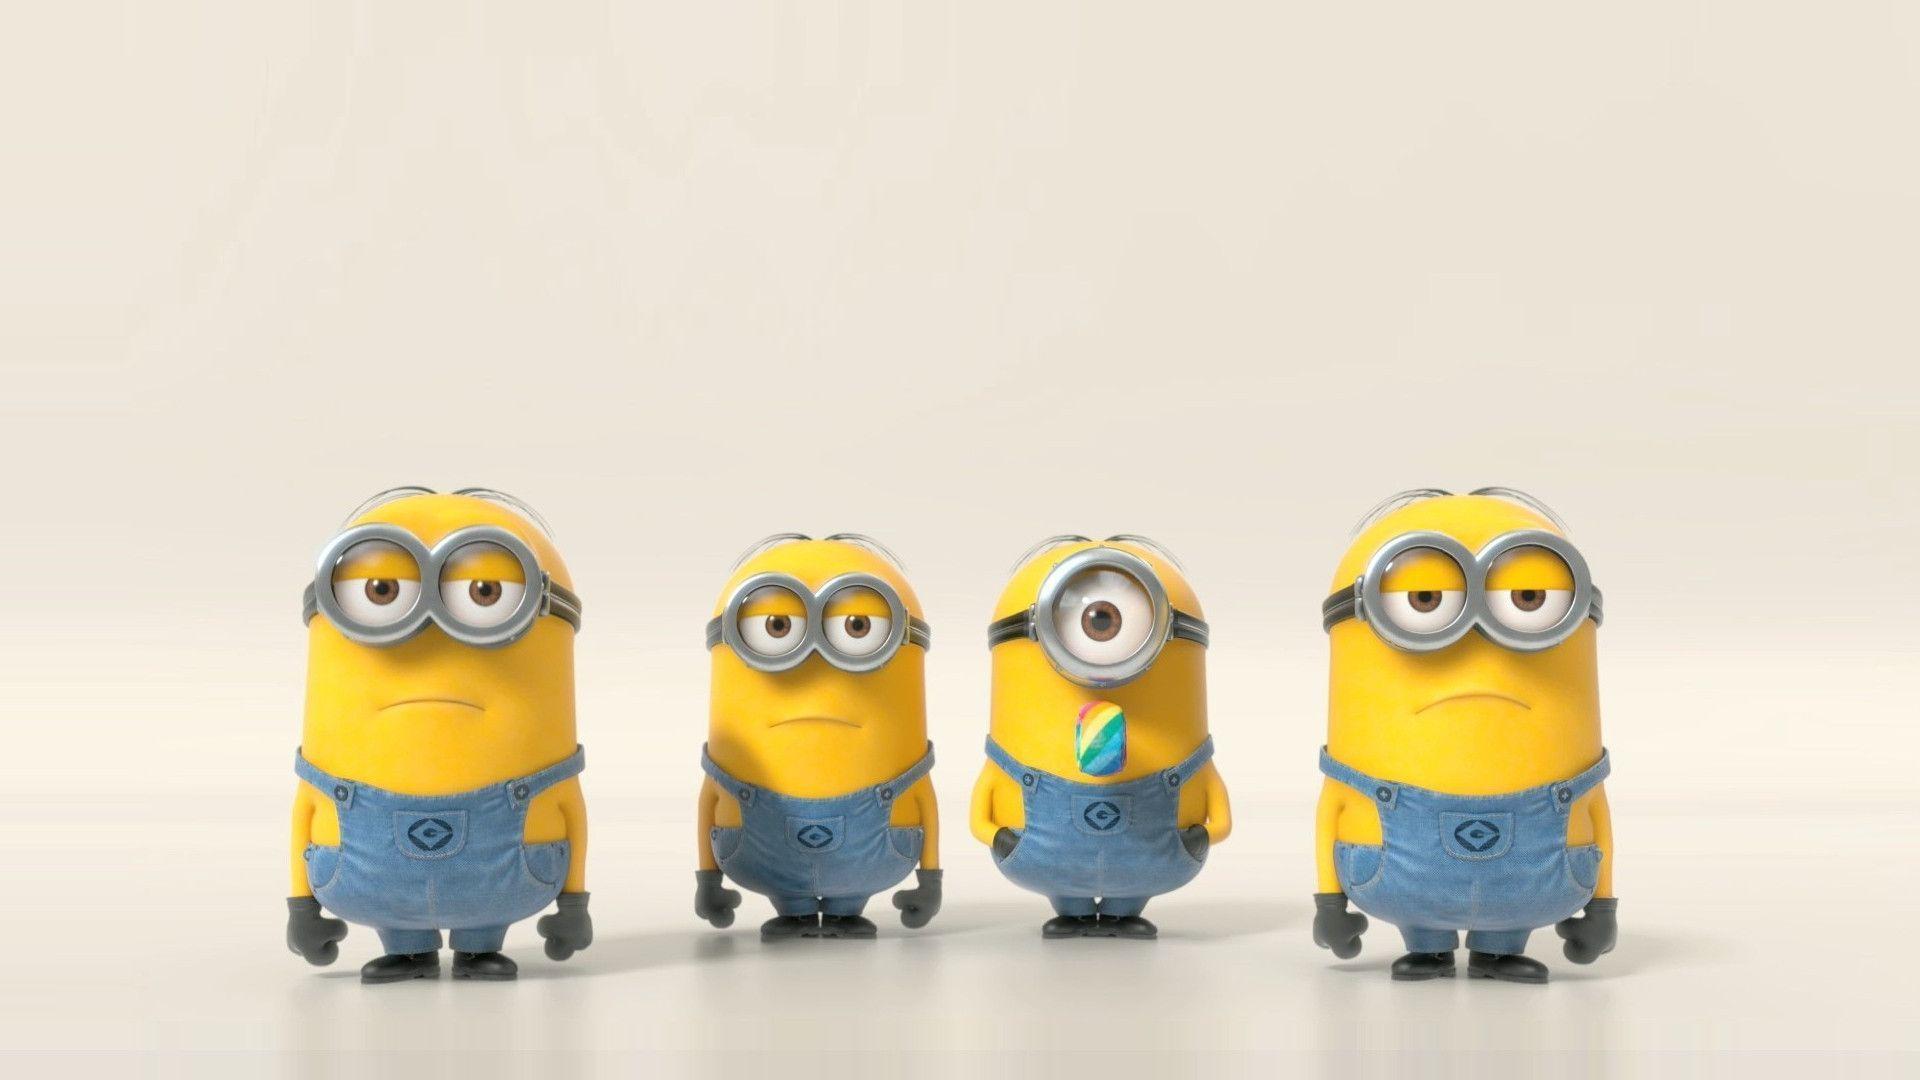 Dispicable Me Minions Mobile Phones Wallpaper Free Download